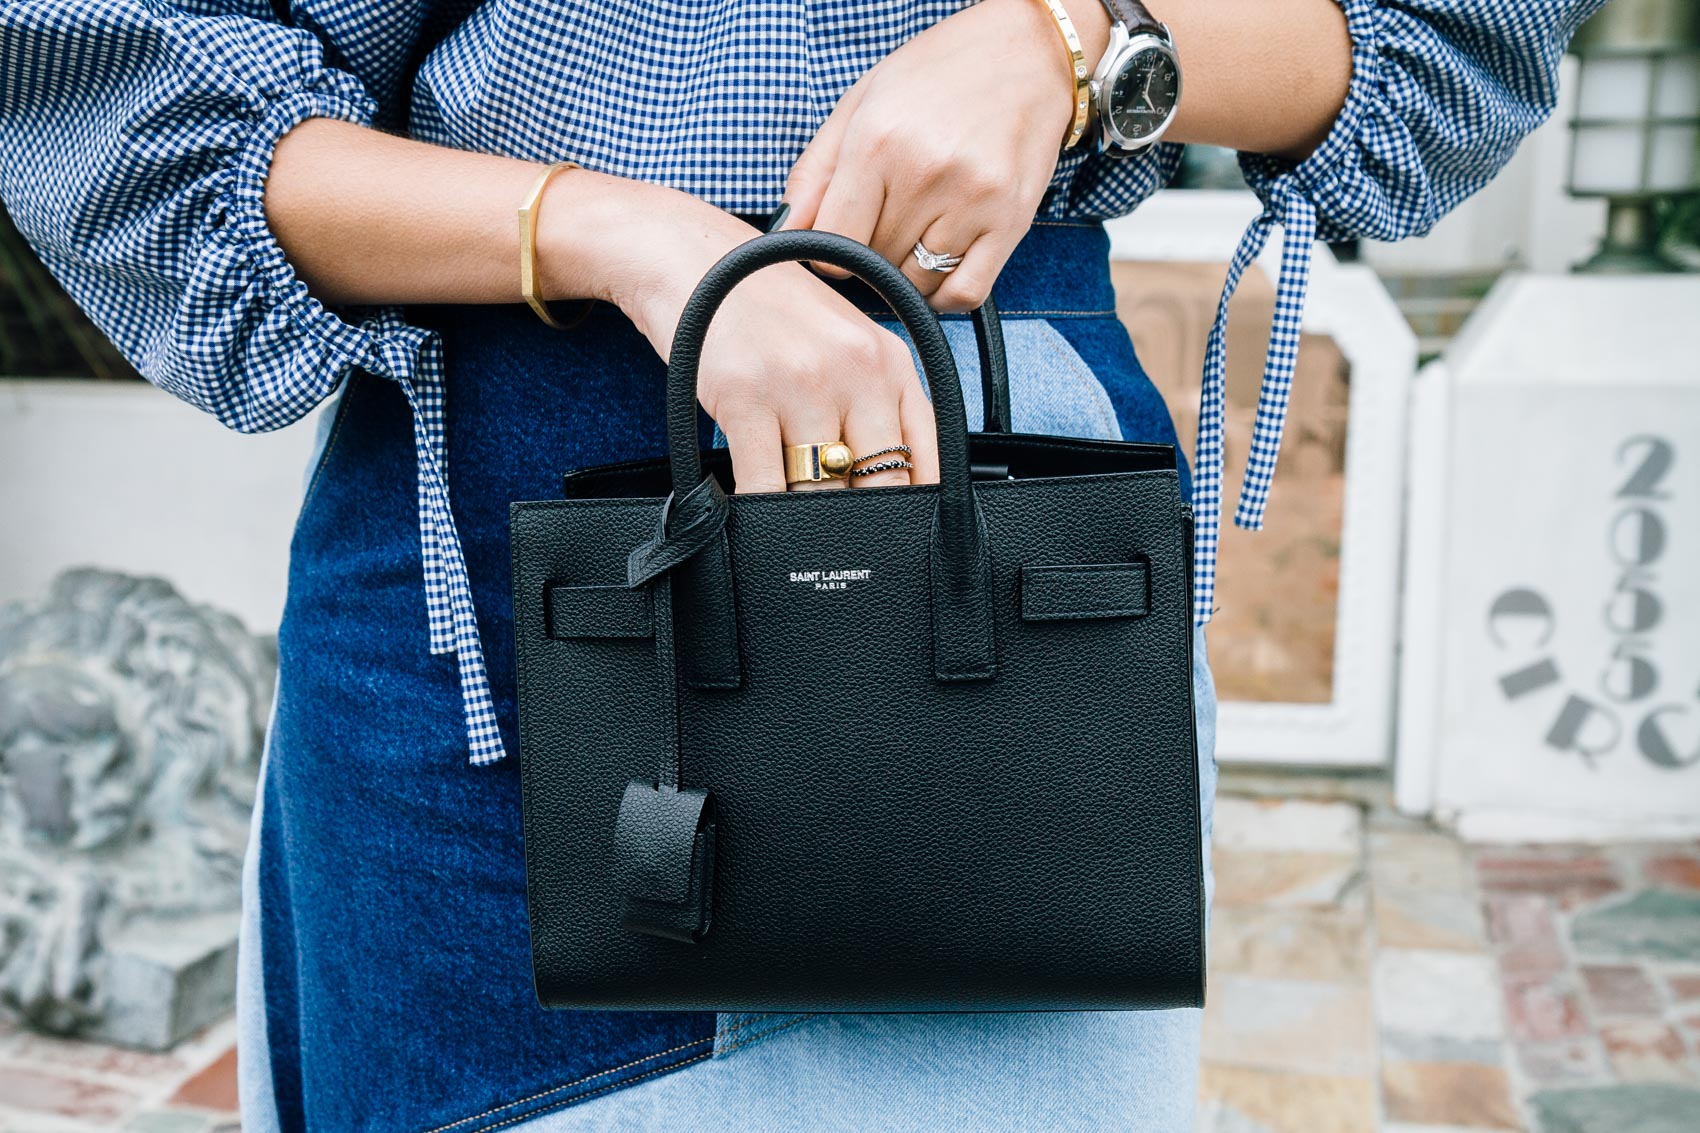 Maristella wears a bracelet and ring from Madewell and a bracelet from Kate Spade, YSL nano Sac De Jour bag in black